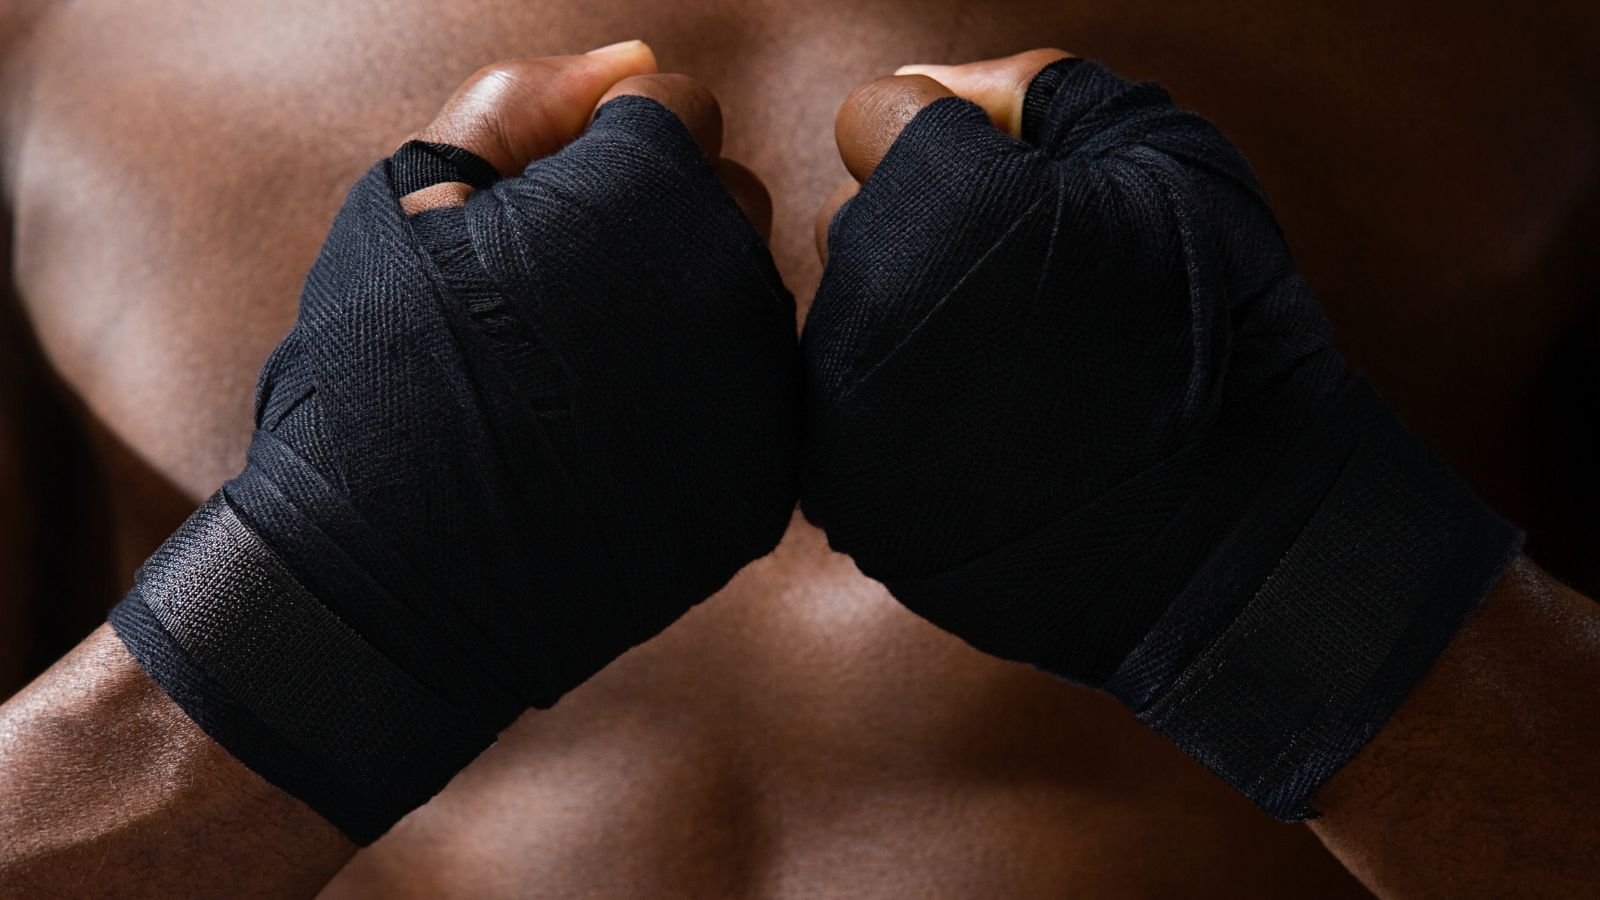 Boxing workouts Improved Balance, Coordination, and Core Stability